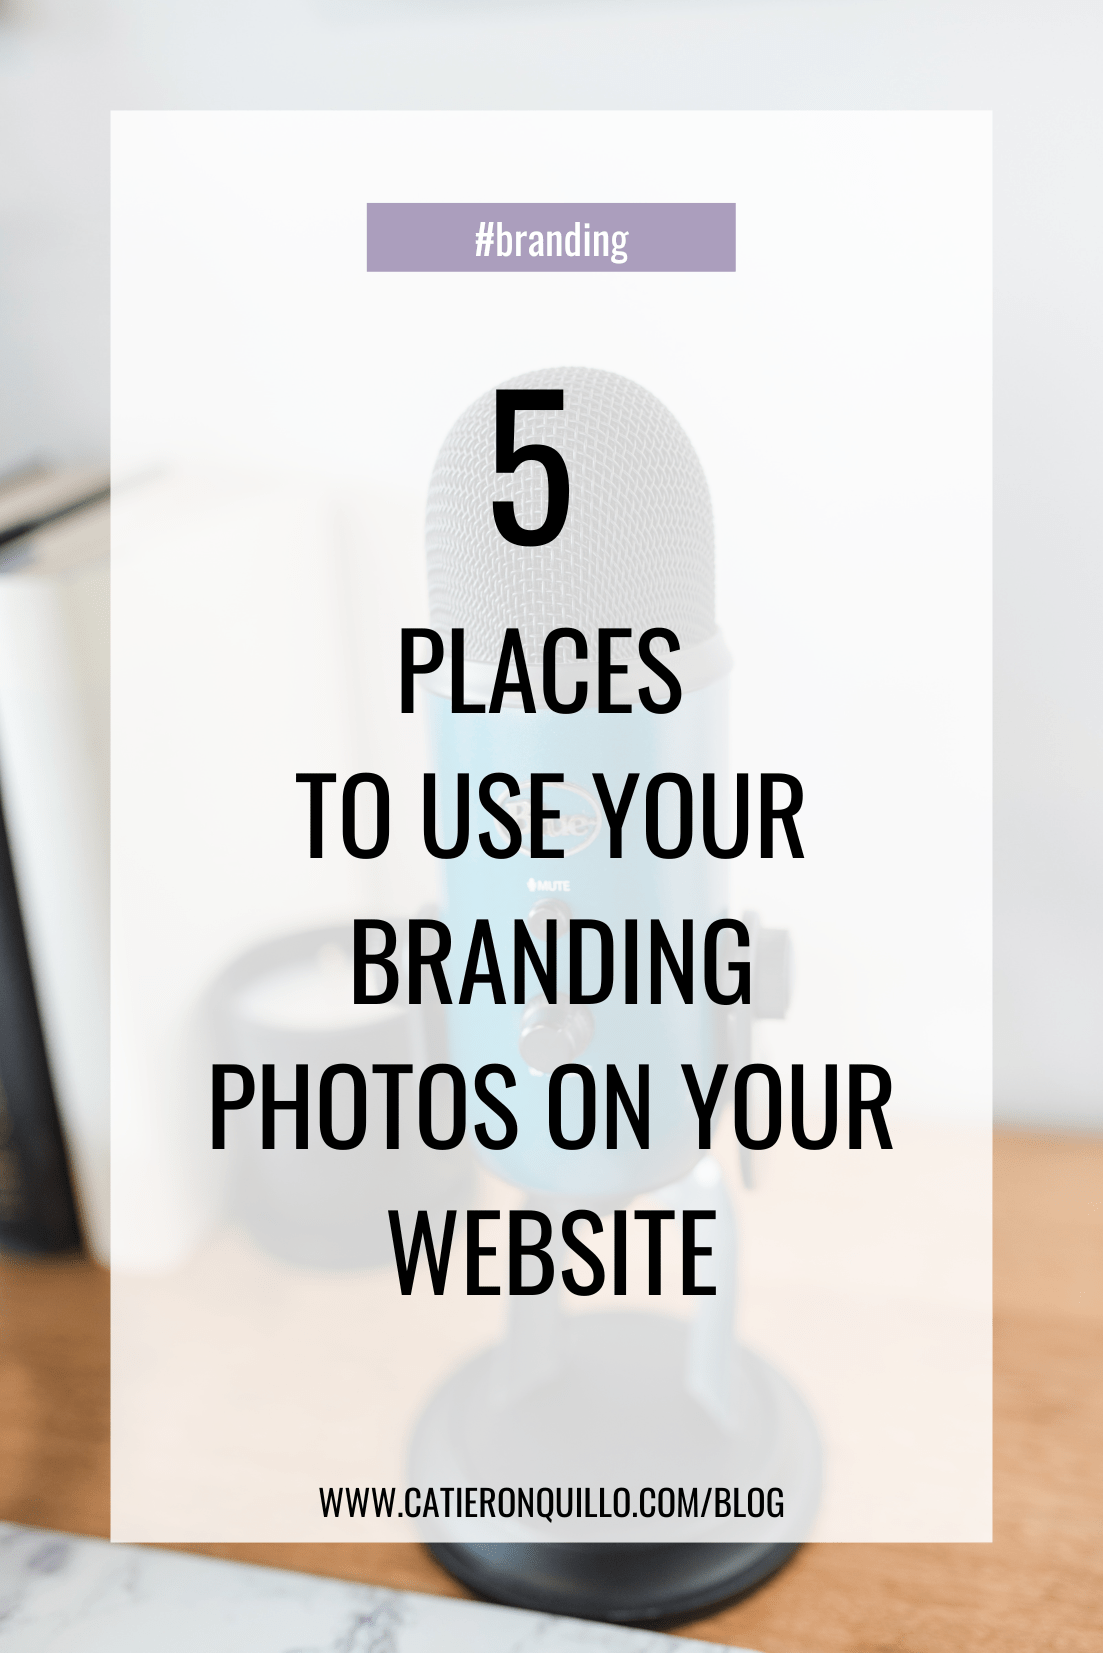 5 PLACES TO USE BRANDING PHOTOS ON YOUR WEBSITE